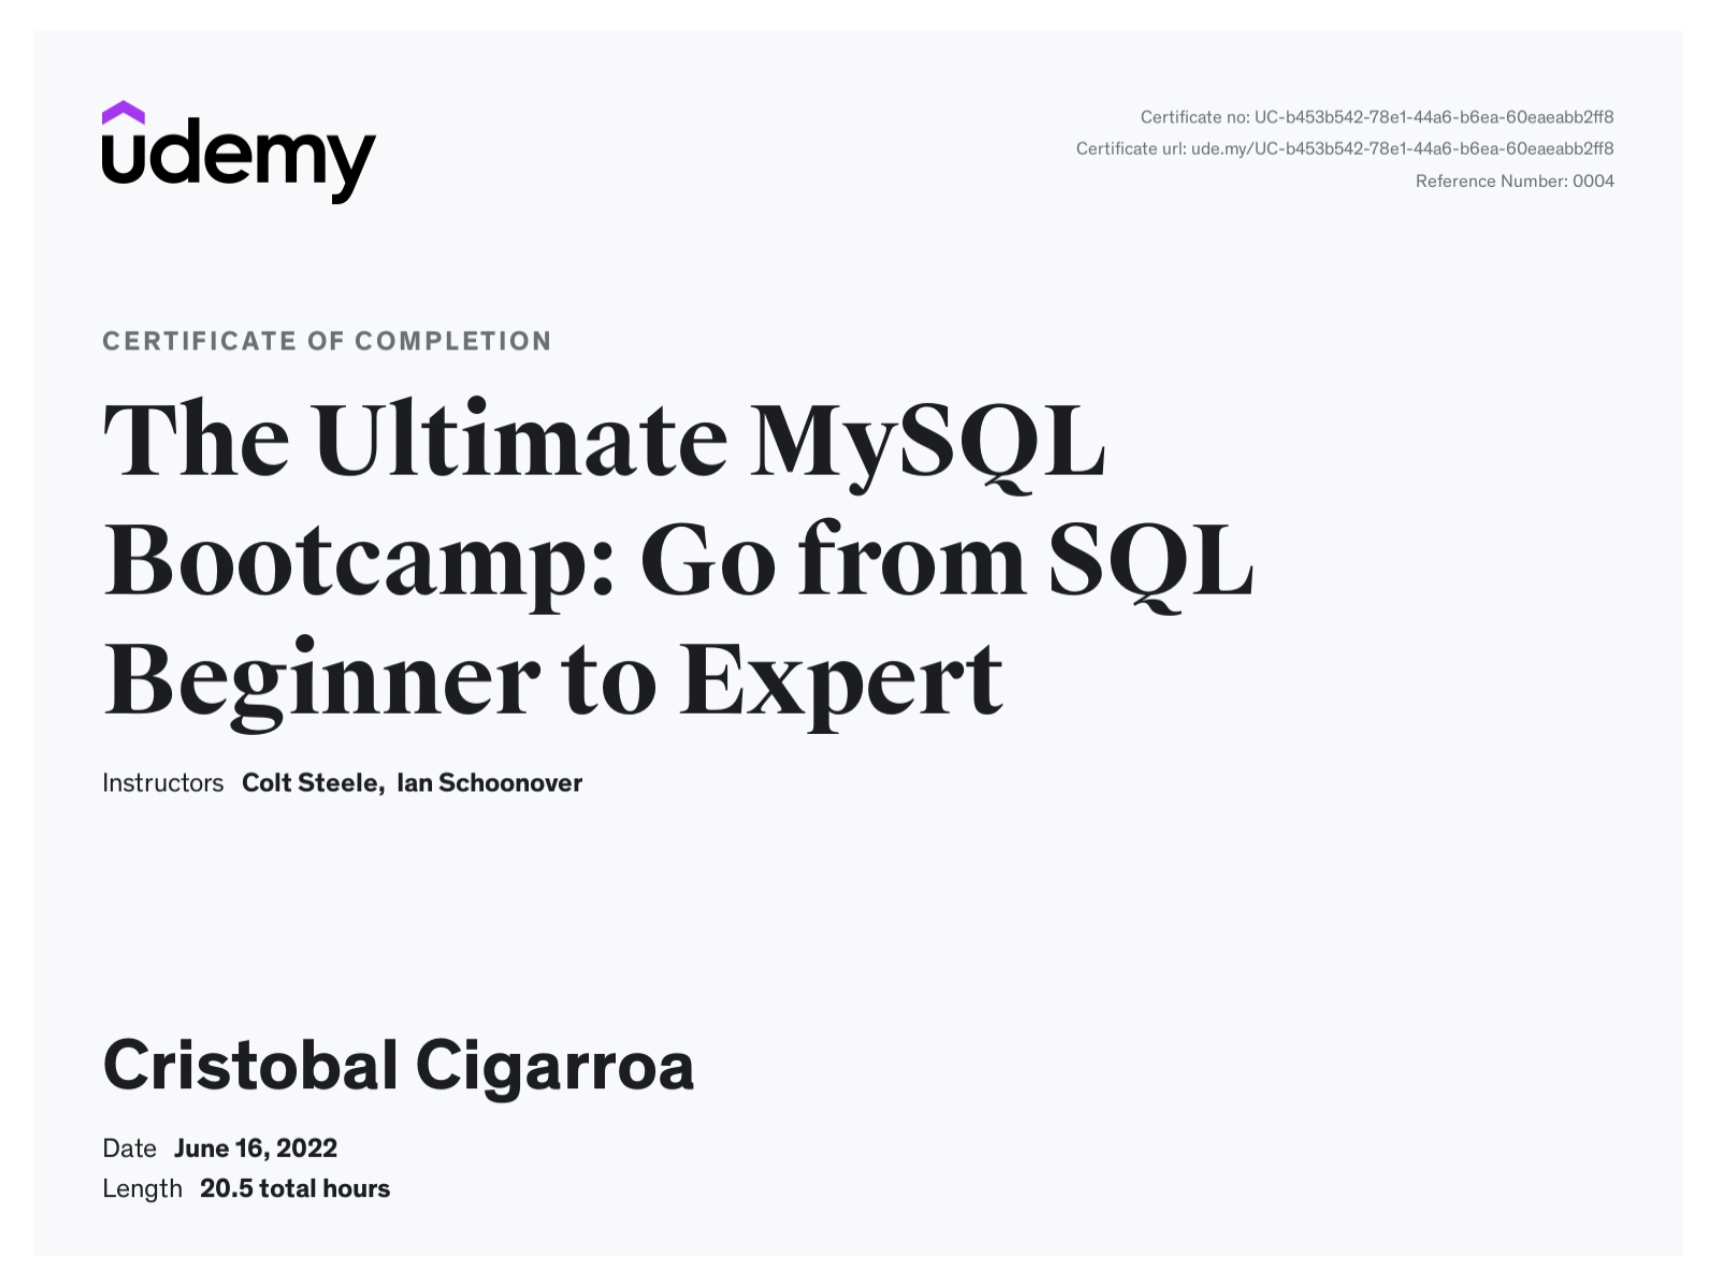 udemy

CERTIFICATE OF COMPLETION

The Ultimate MySQL
Bootcamp: Go from SQL
Beginner to Expert

Instructors Colt Steele, lan Schoonover

Cristobal Cigarroa

Date June 16,2022
Length 20.5 total hours